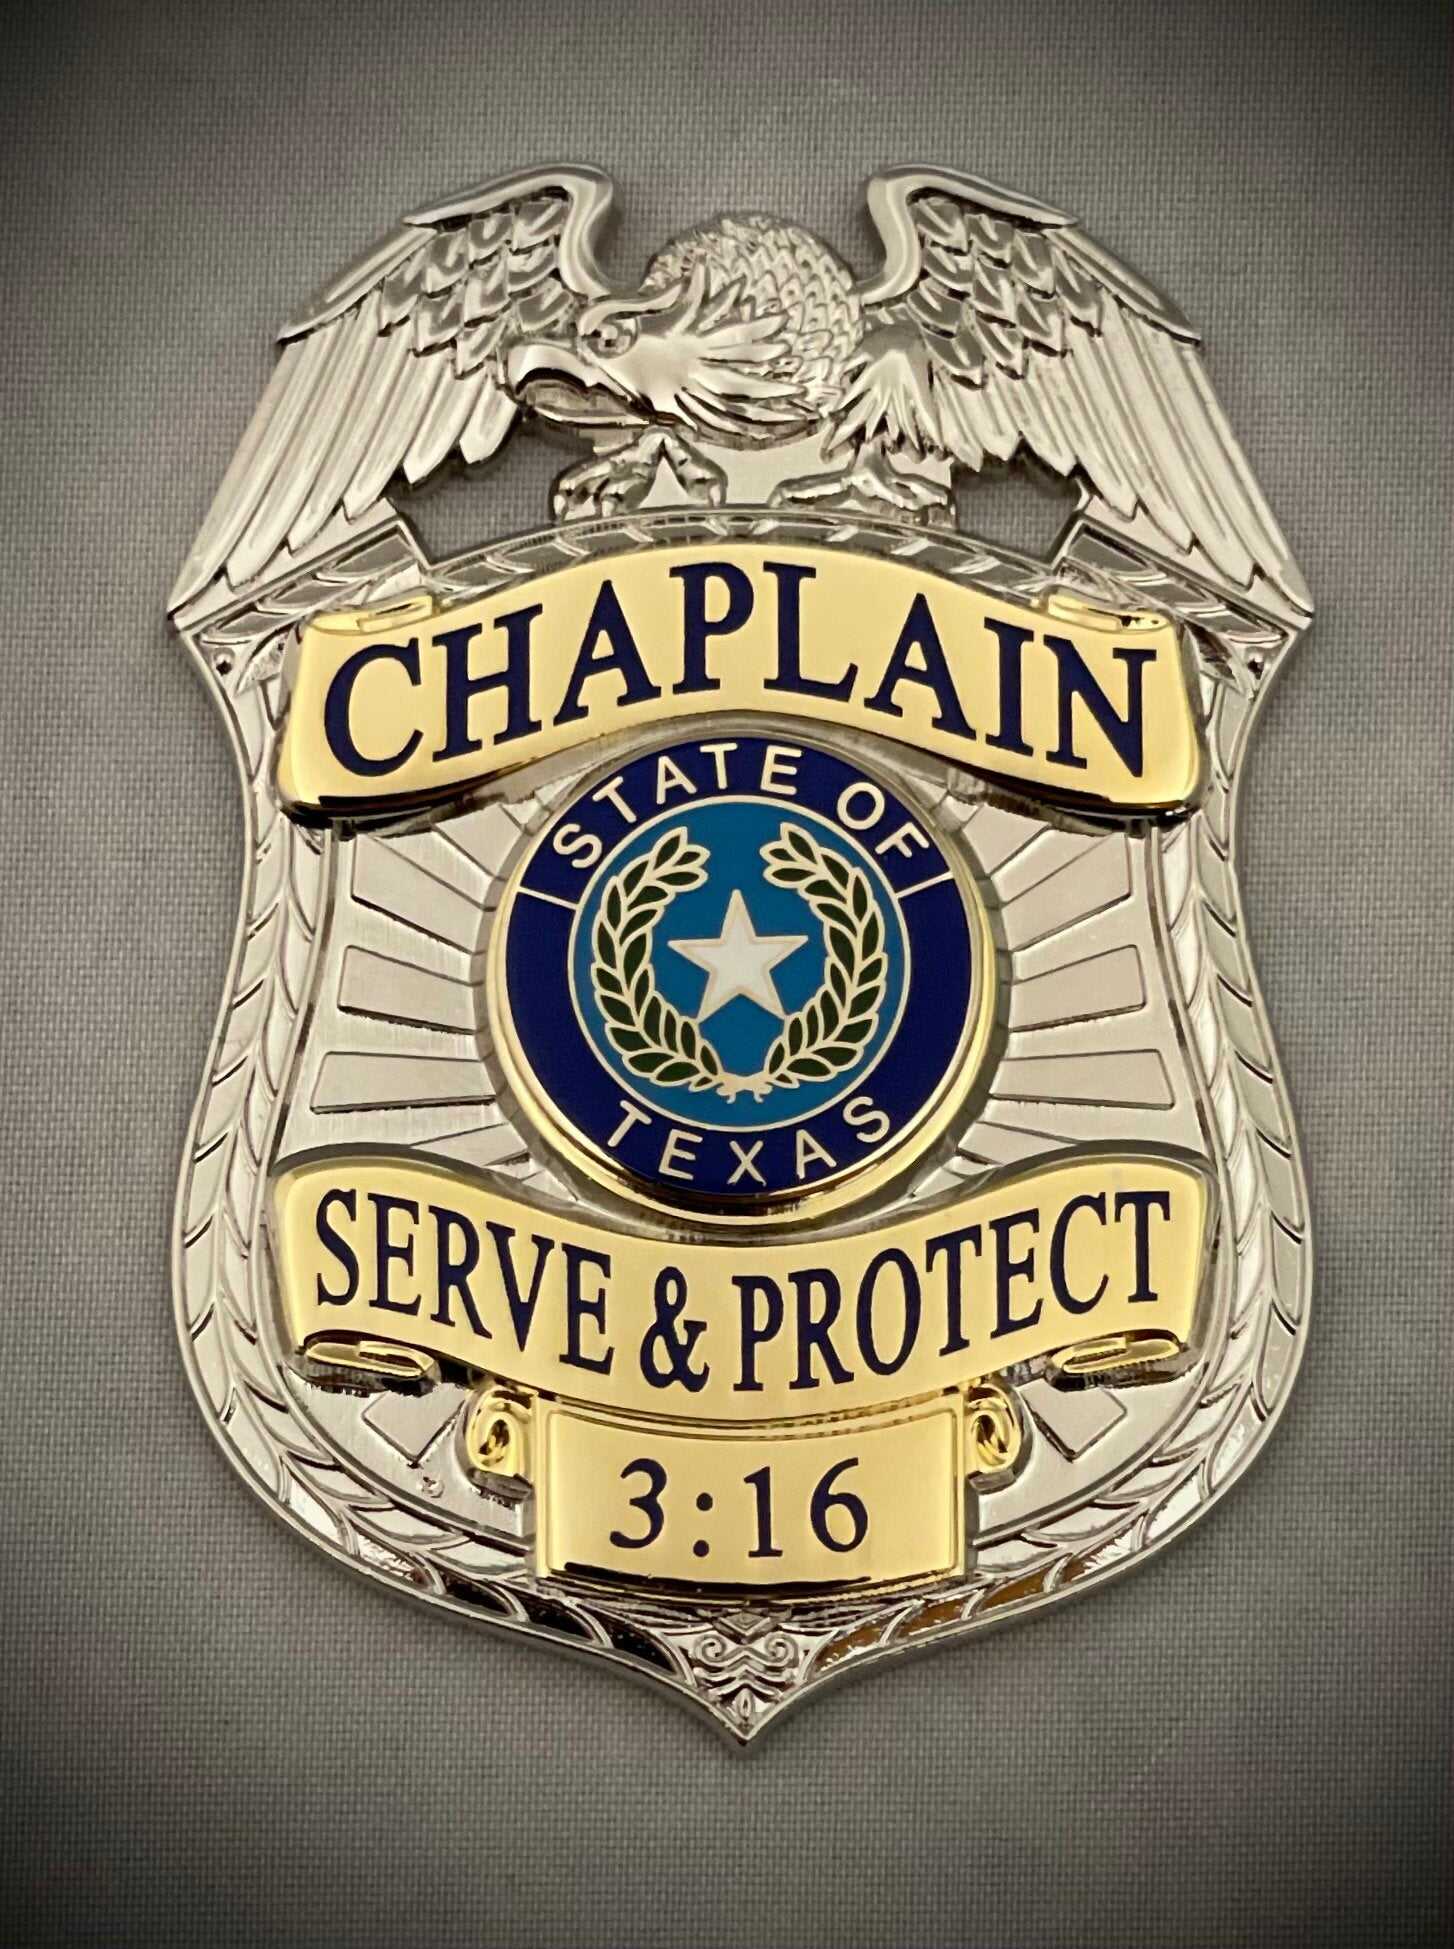 Chaplain Serve and Protect Silver Two-Tone Badge and 2 Nameplates leather ID holder